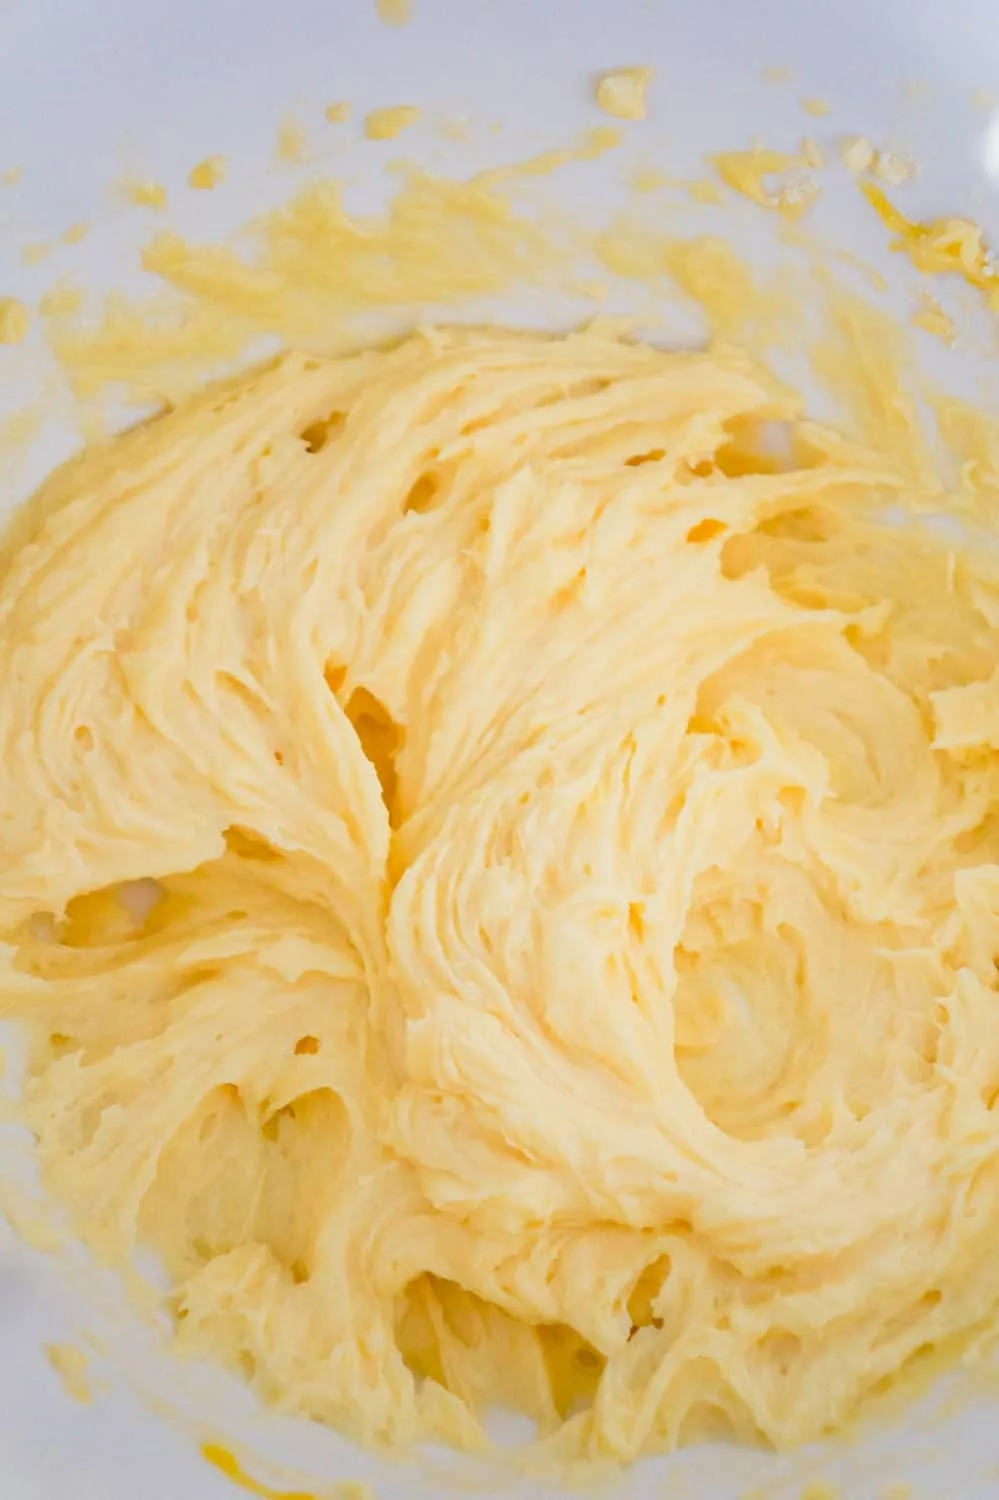 butter, eggs and vanilla instant pudding mix creamed together in a mixing bowl